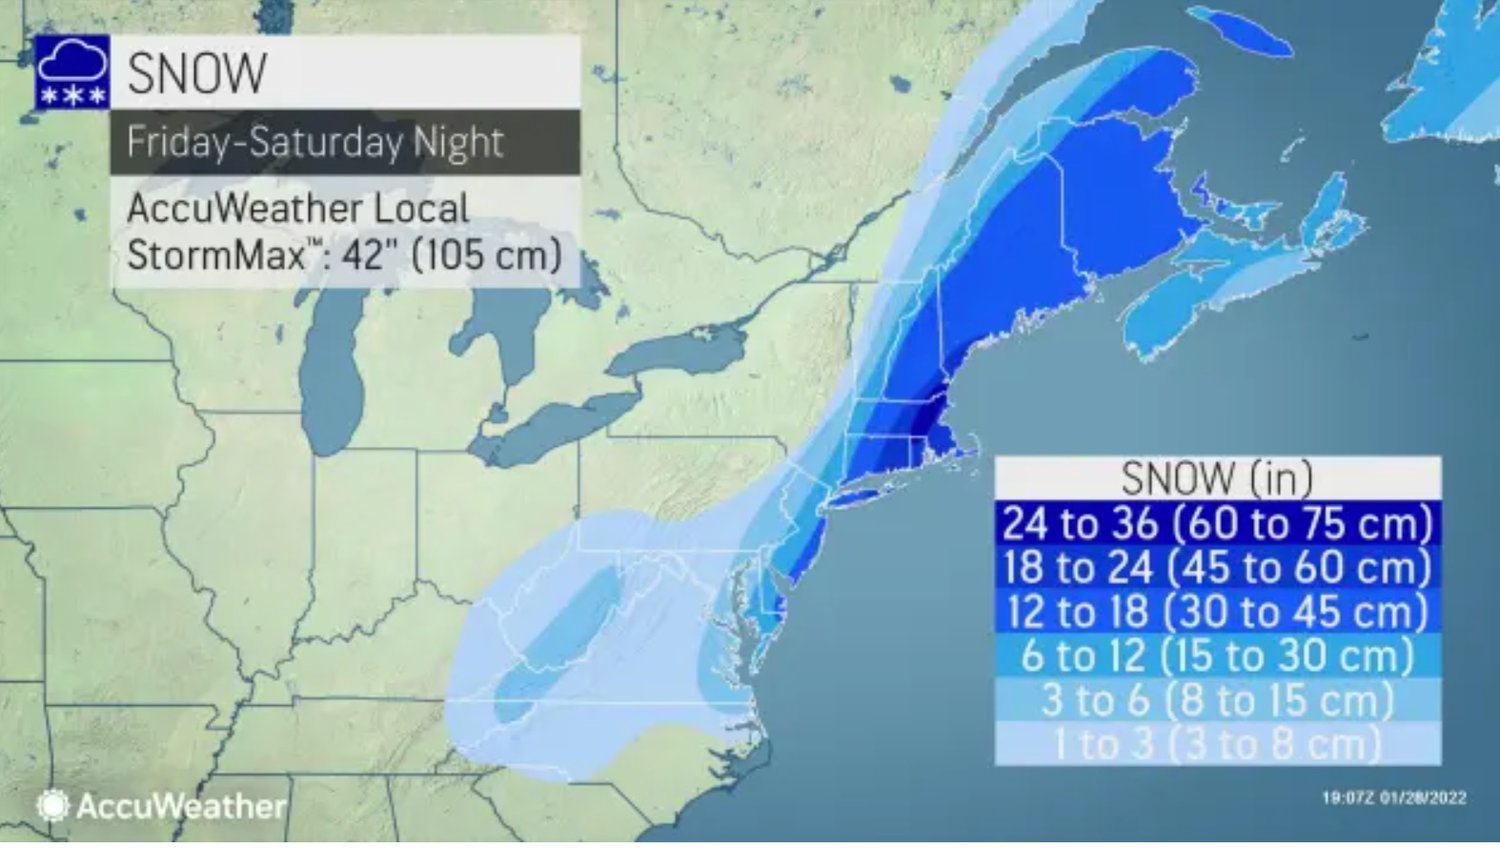 Accuweather forecasters are predicting 2 to 3 feet of snow for southern New England.